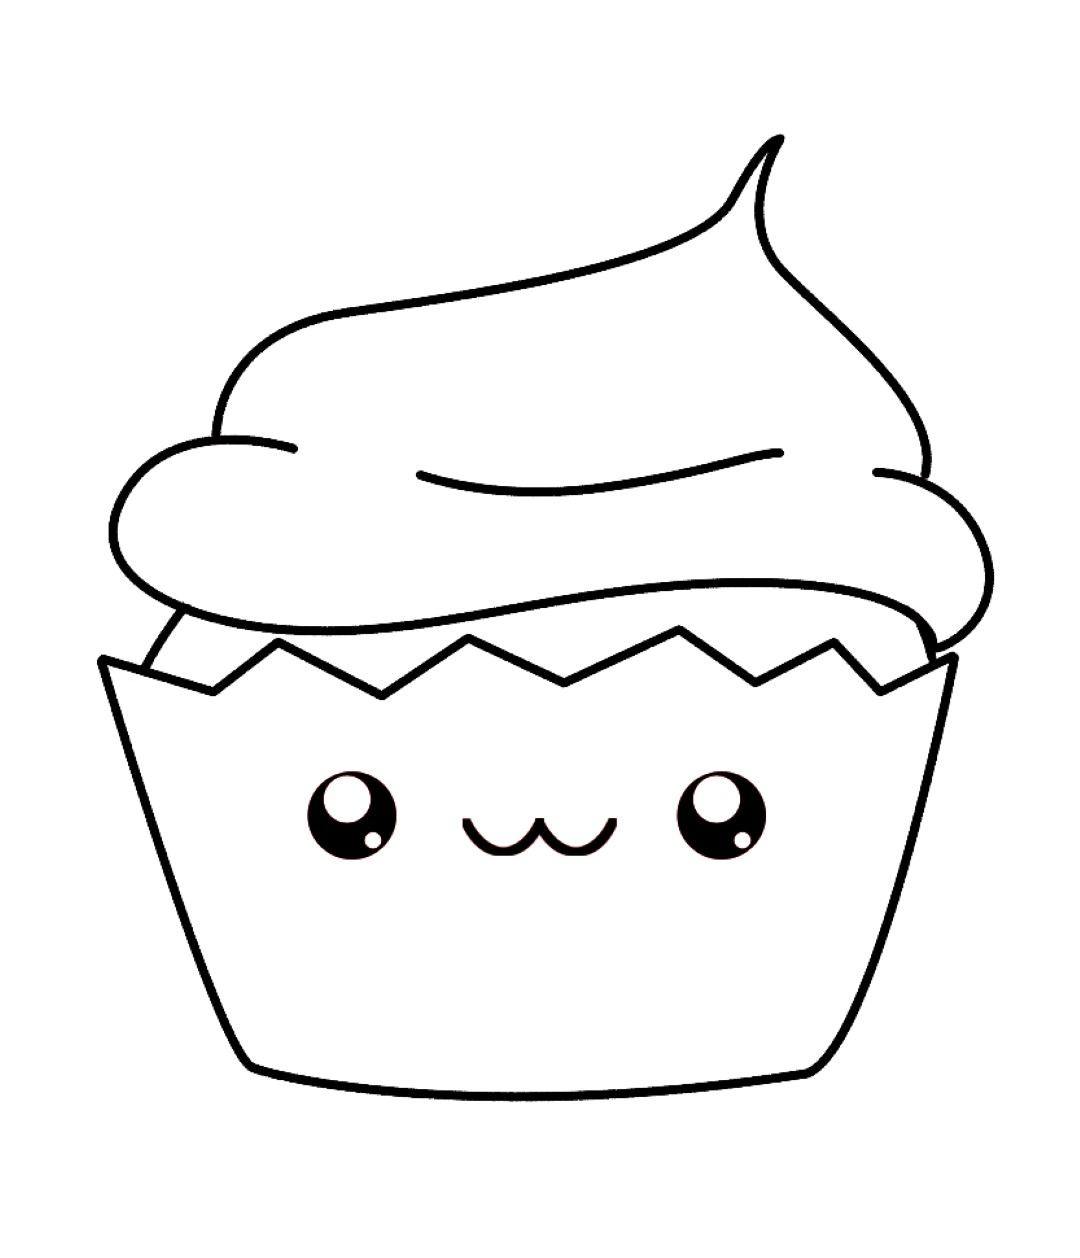 Kawaii Coloring Pages | Free download on ClipArtMag